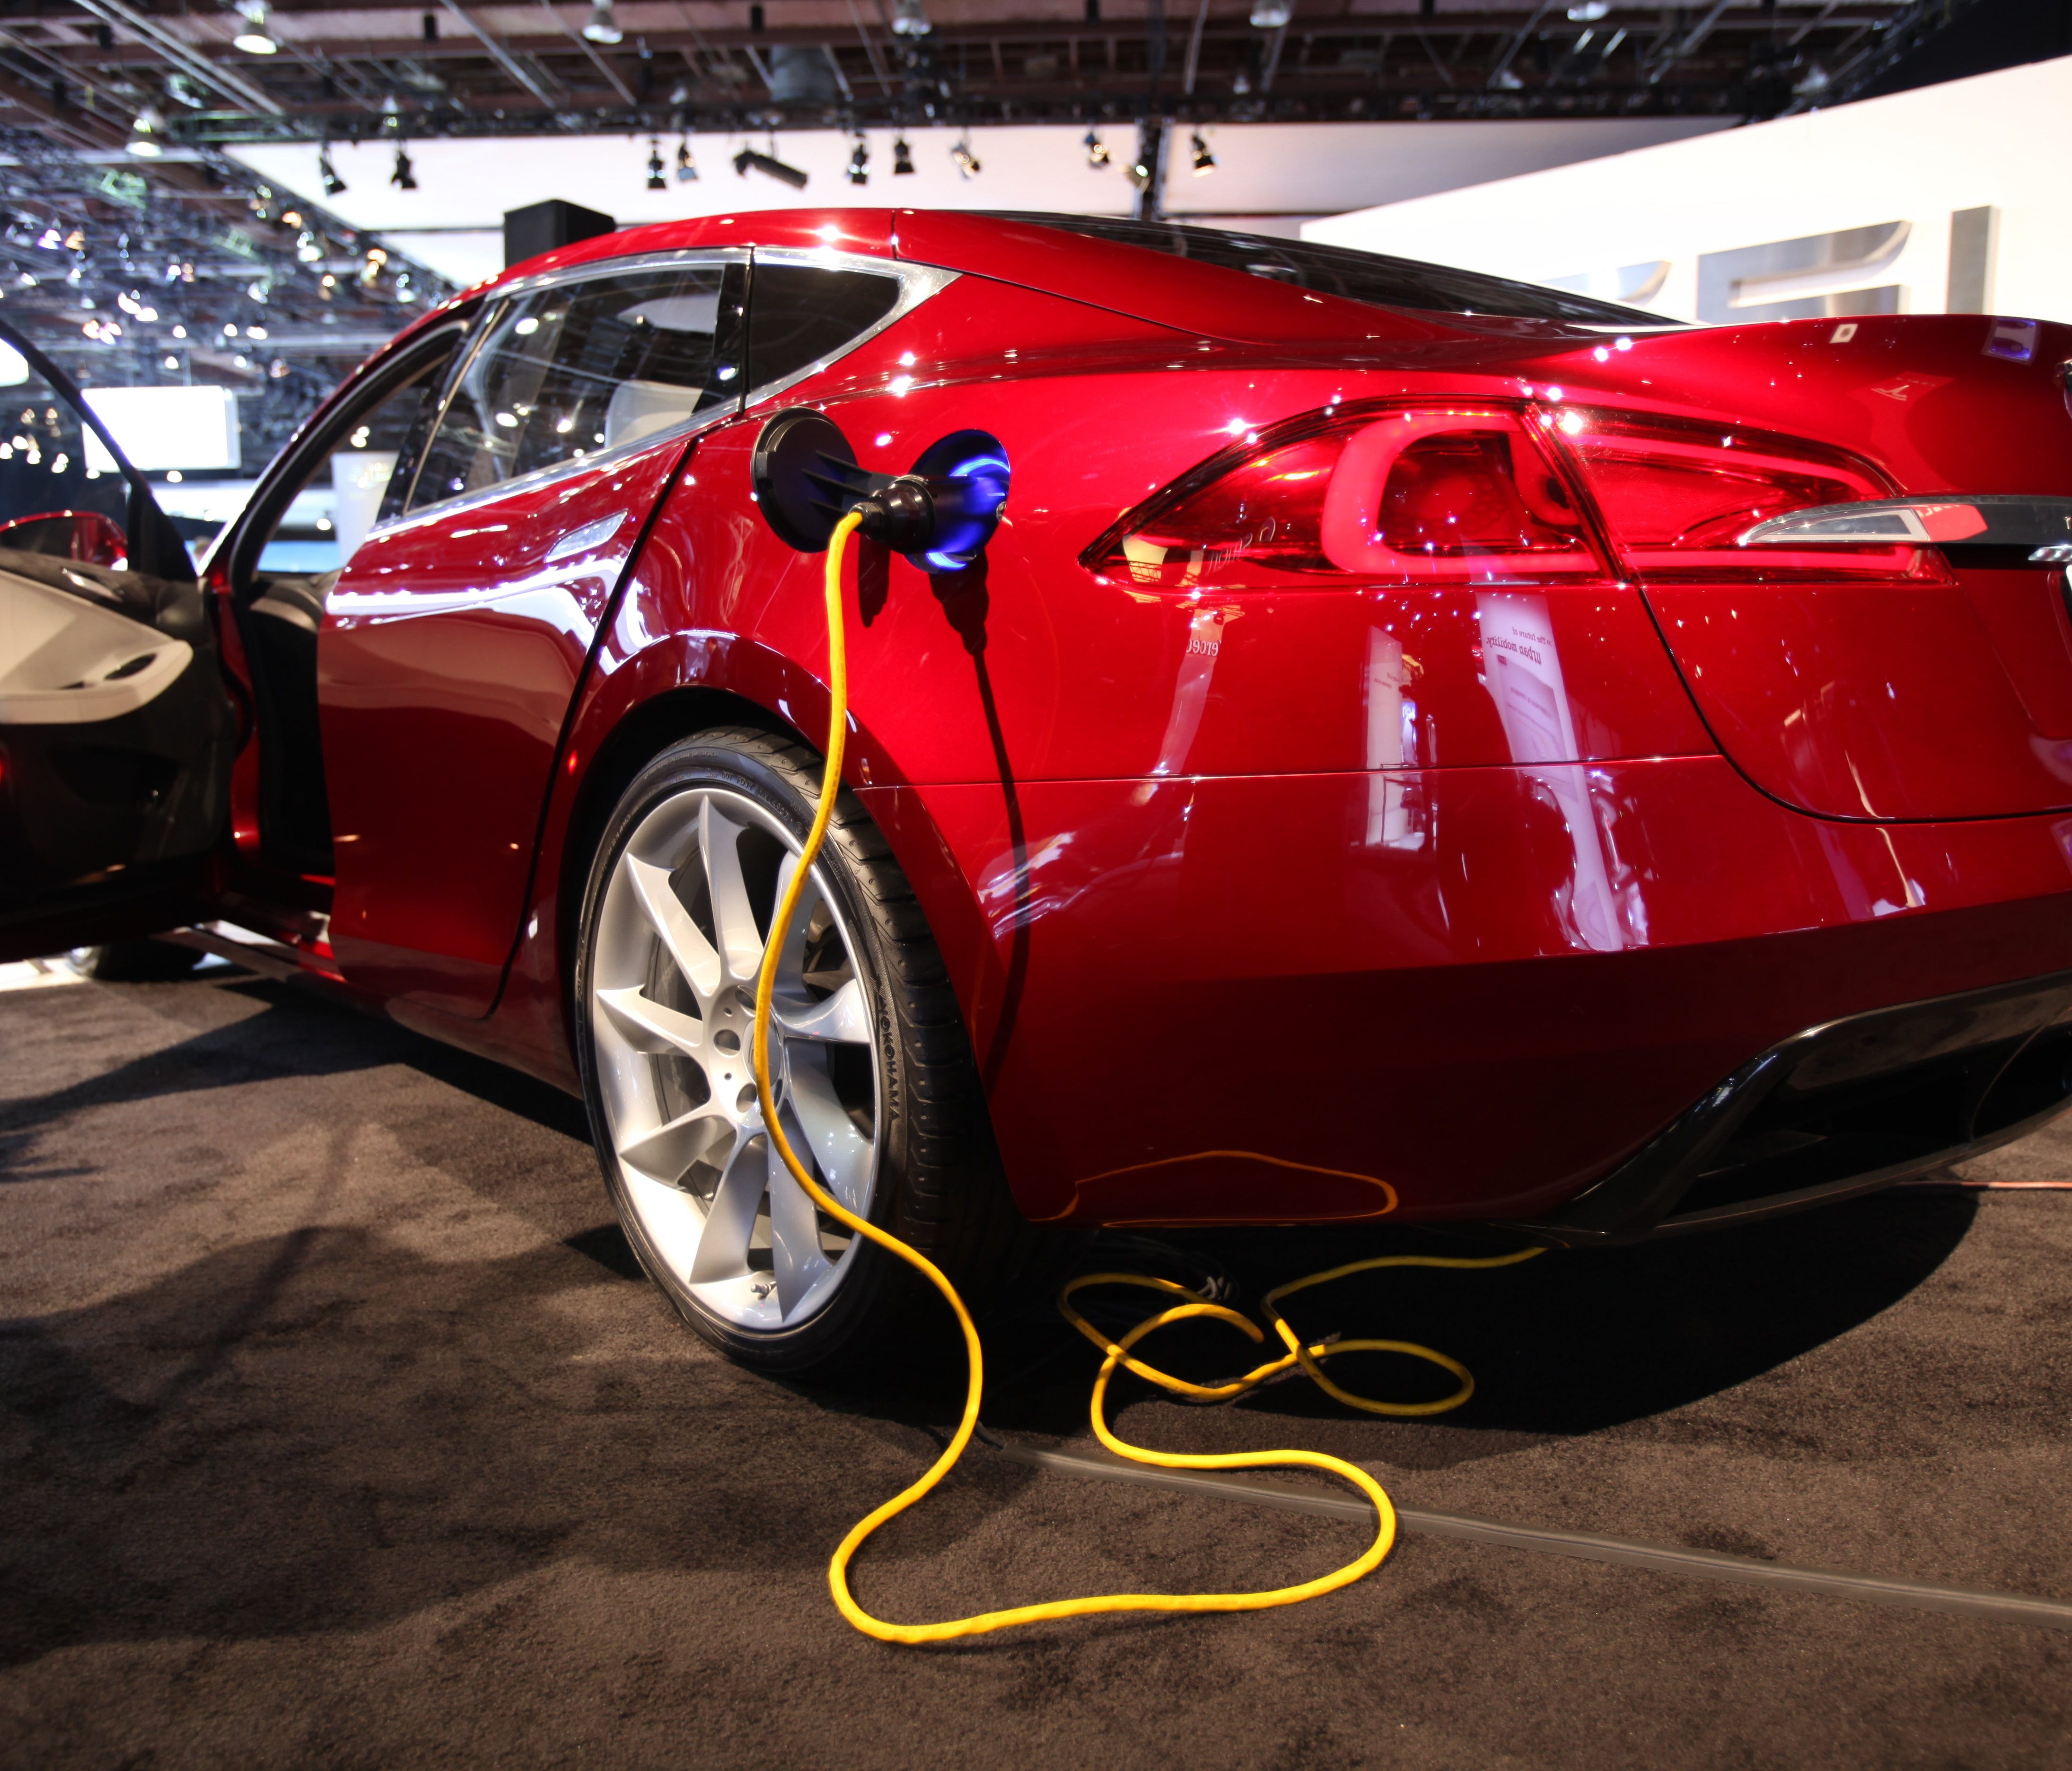 The Tesla Model S sedan has up to 300 miles range per charge and is hoped to be available to the public by 2012, shown at the North American International Auto Show at Cobo Center, Detroit on Jan. 12, 2010.   Tesla is auctioning its 1000th Roadster w